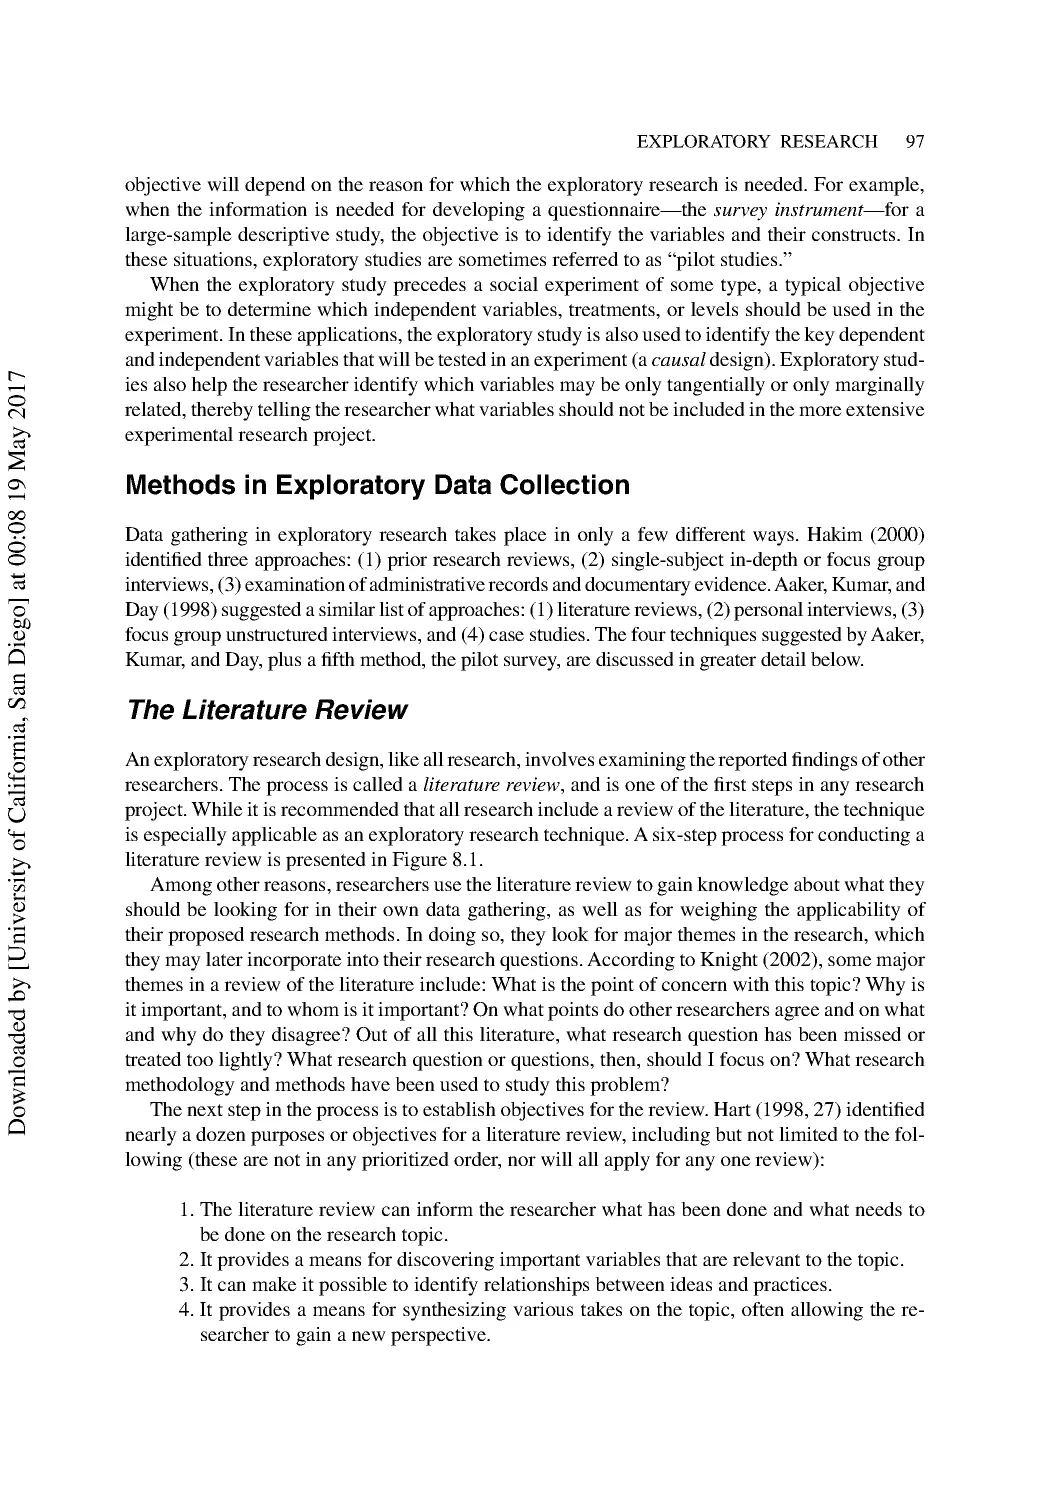 Methods in Exploratory Data Collection